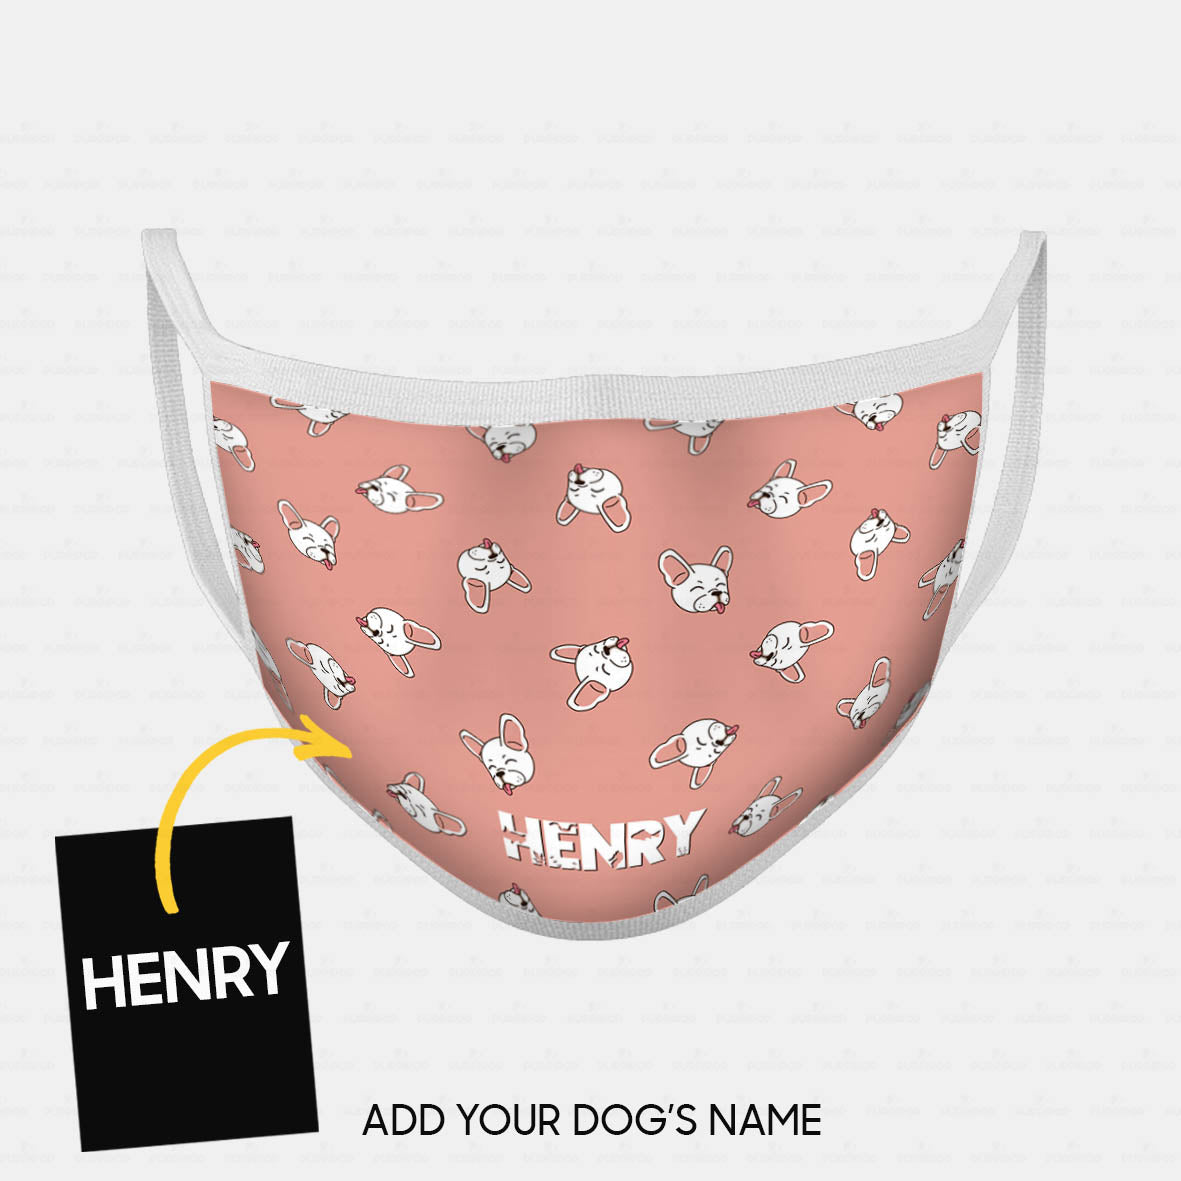 Personalized Dog Gift Idea - Bull With Tongue Out On Pink For Dog Lovers - Cloth Mask